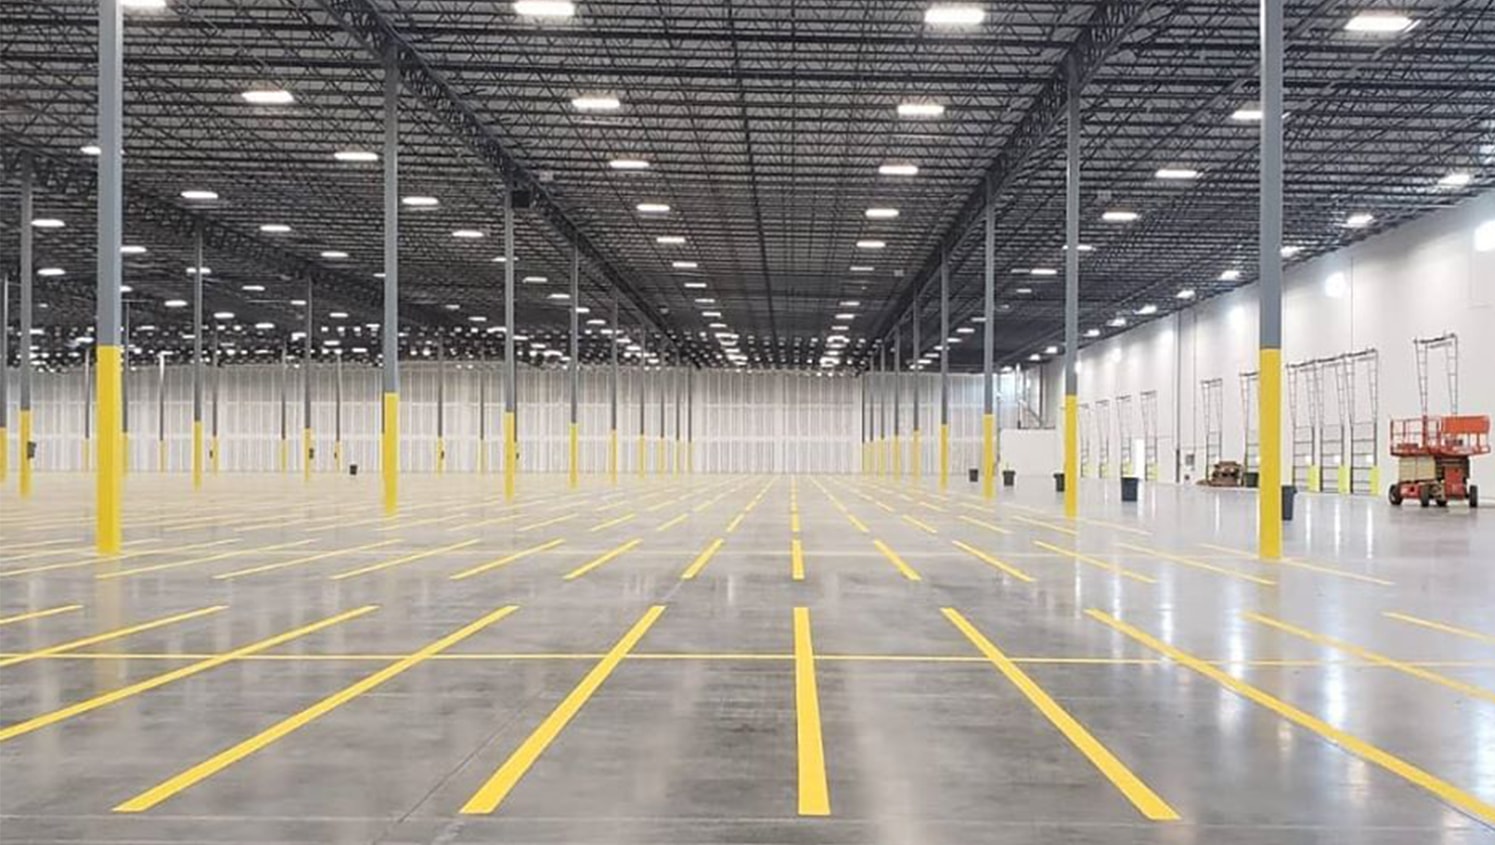 tampa warehouse floor marking project completed by g-force